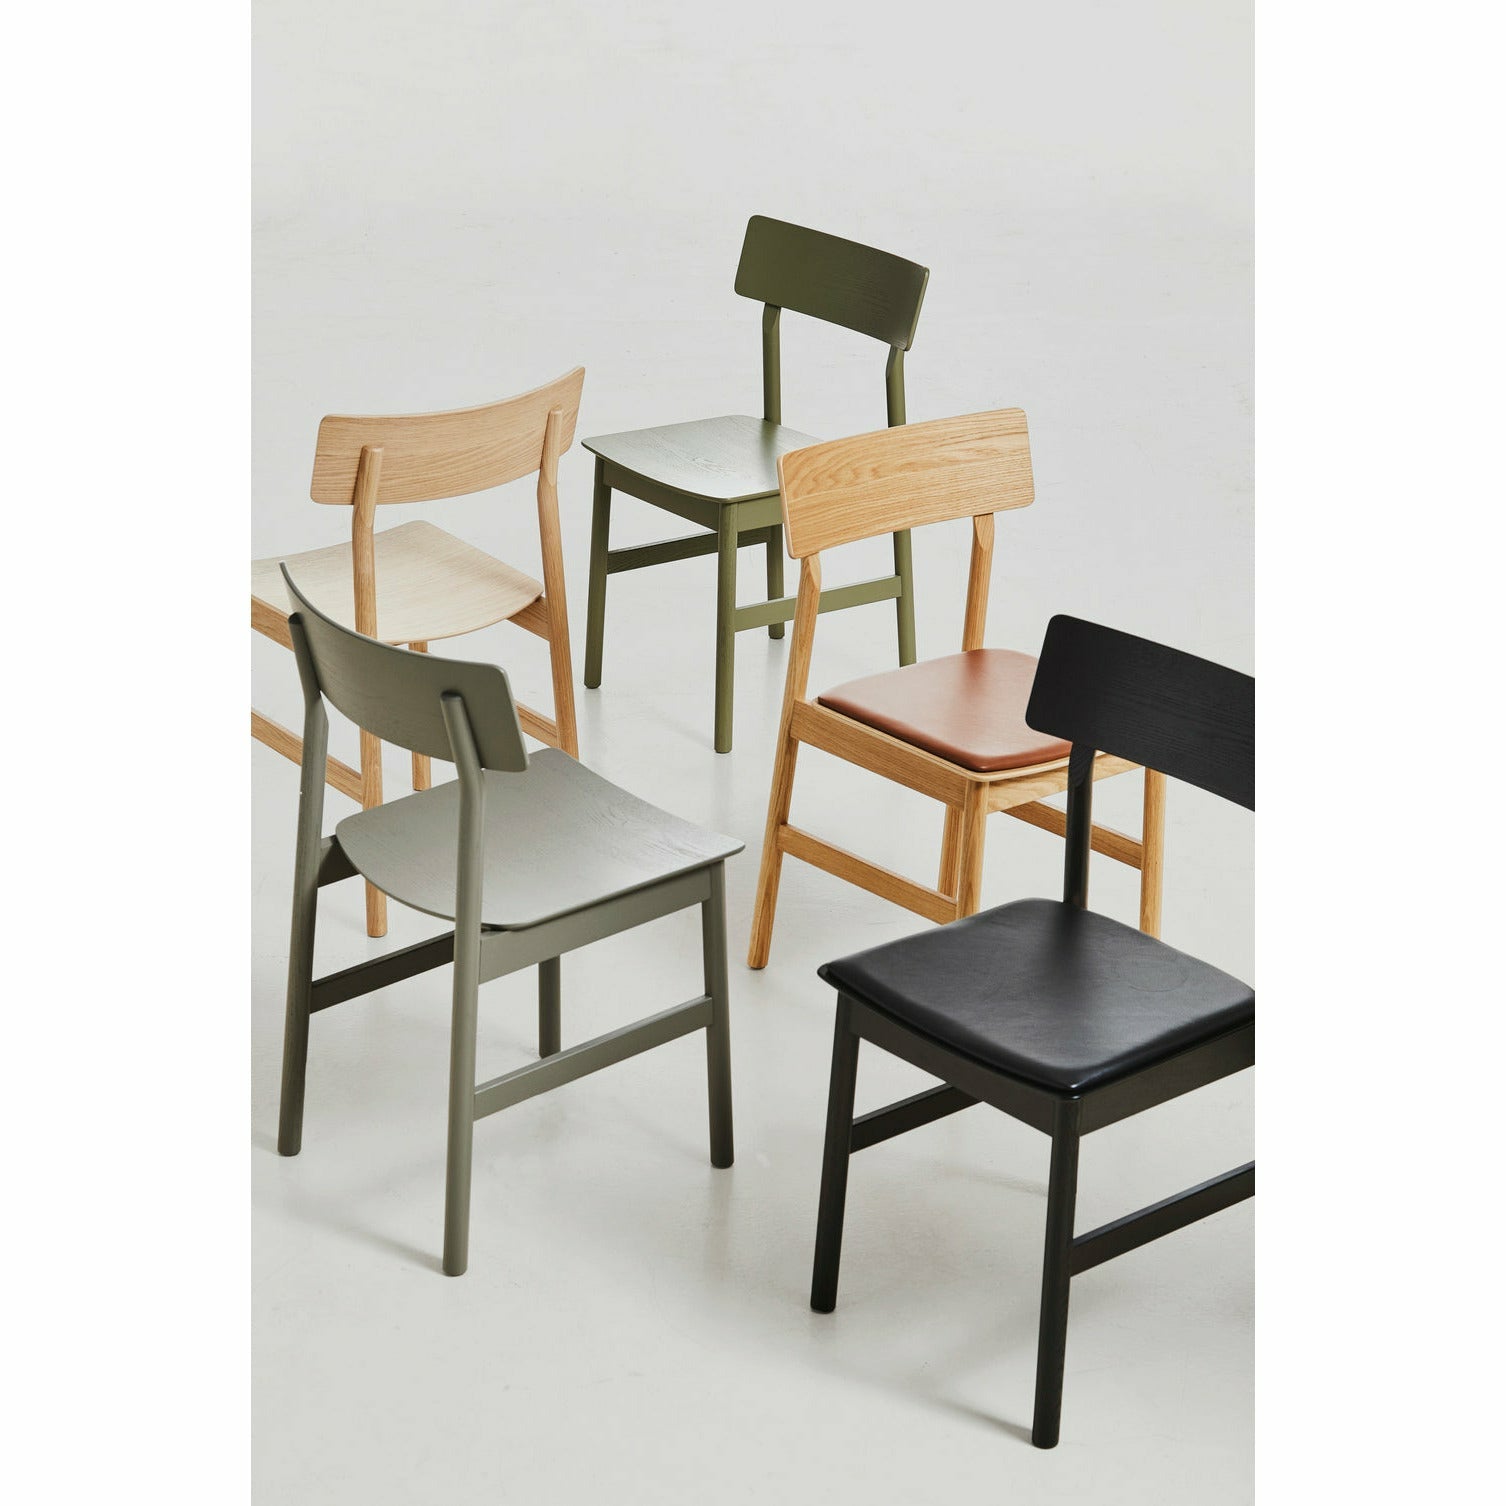 WOUD -  Pause dining chair 2.0 - Black